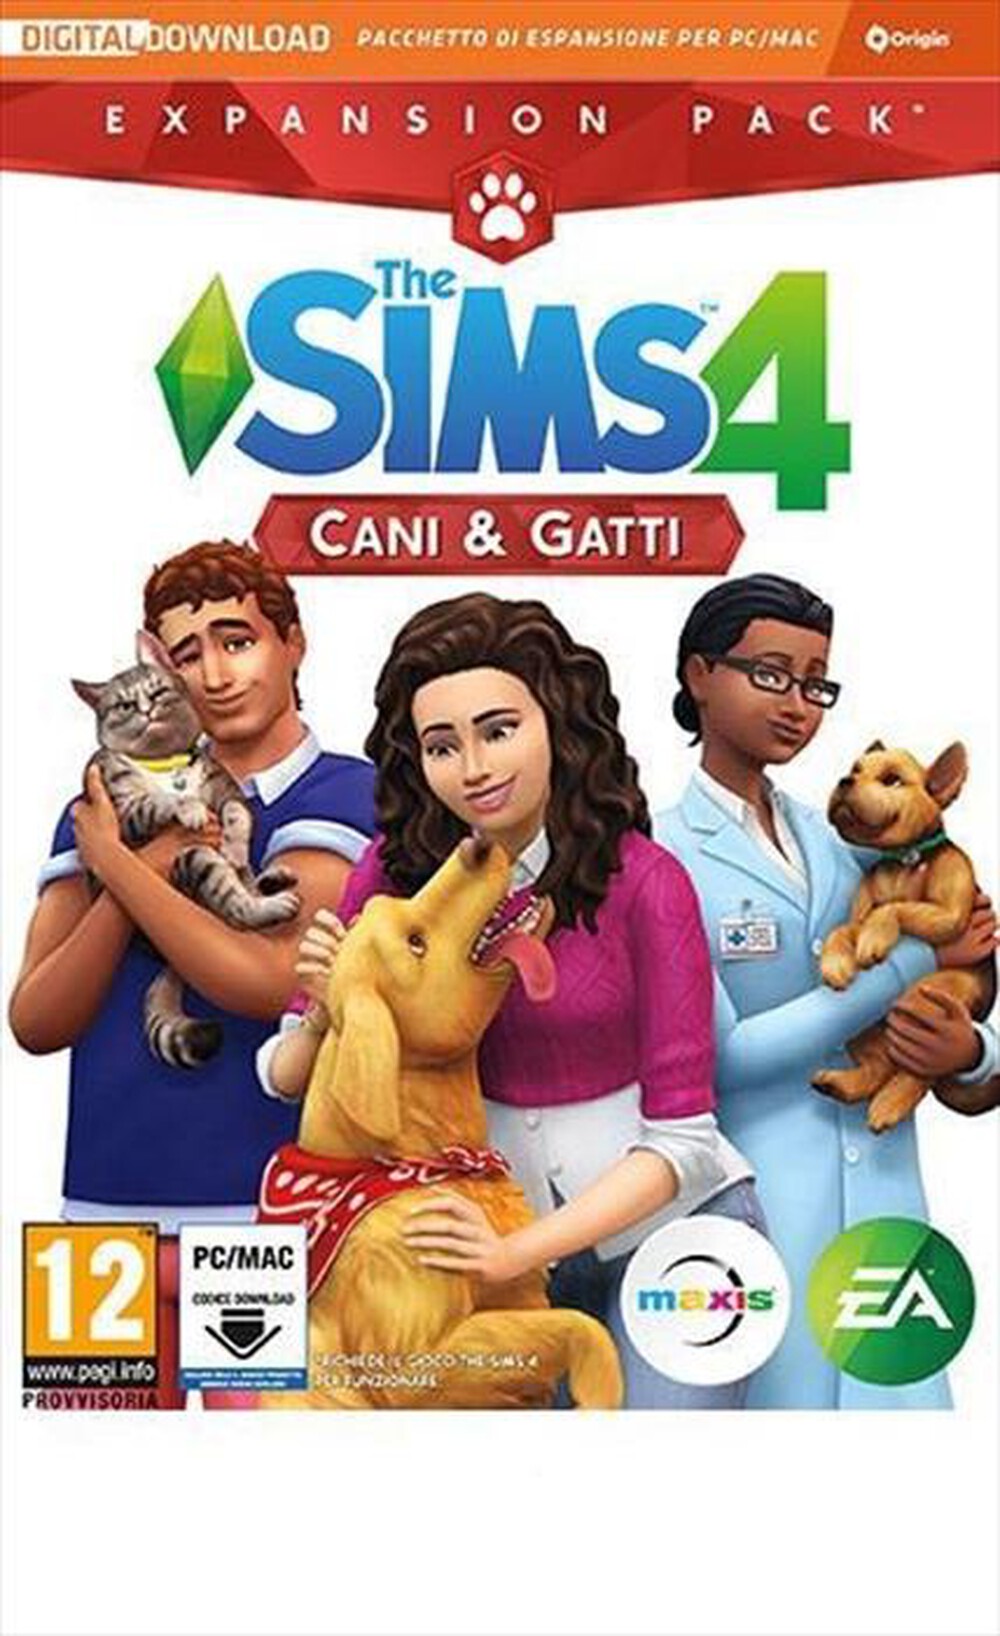 "ELECTRONIC ARTS - The Sims 4 CatS&Dogs Expansion (CIAB)"